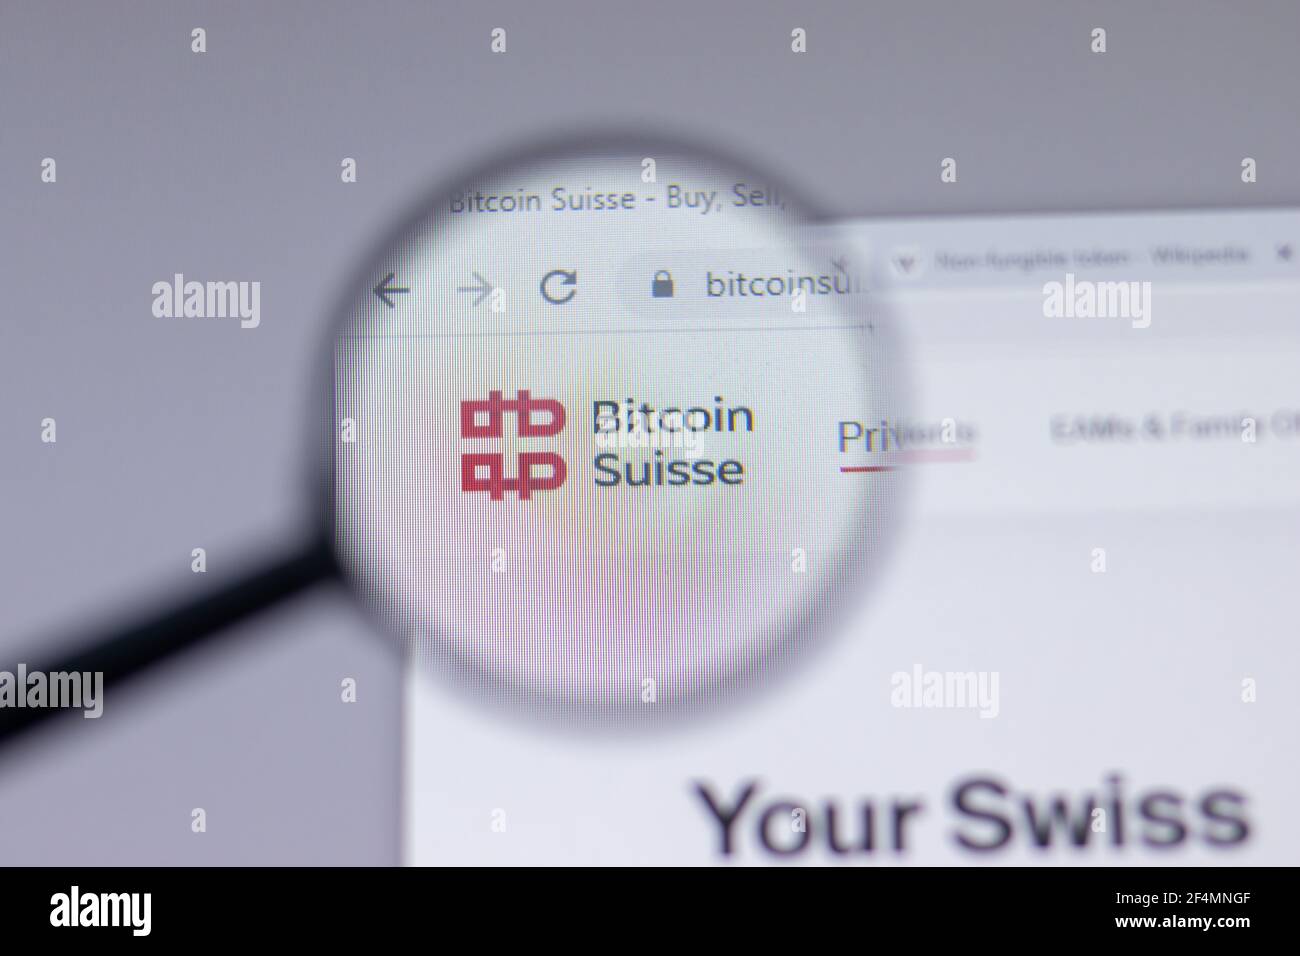 New York, USA - 18 March 2021: Bitcoin Suisse logo sign, icon on website close-up, Illustrative Editorial Stock Photo